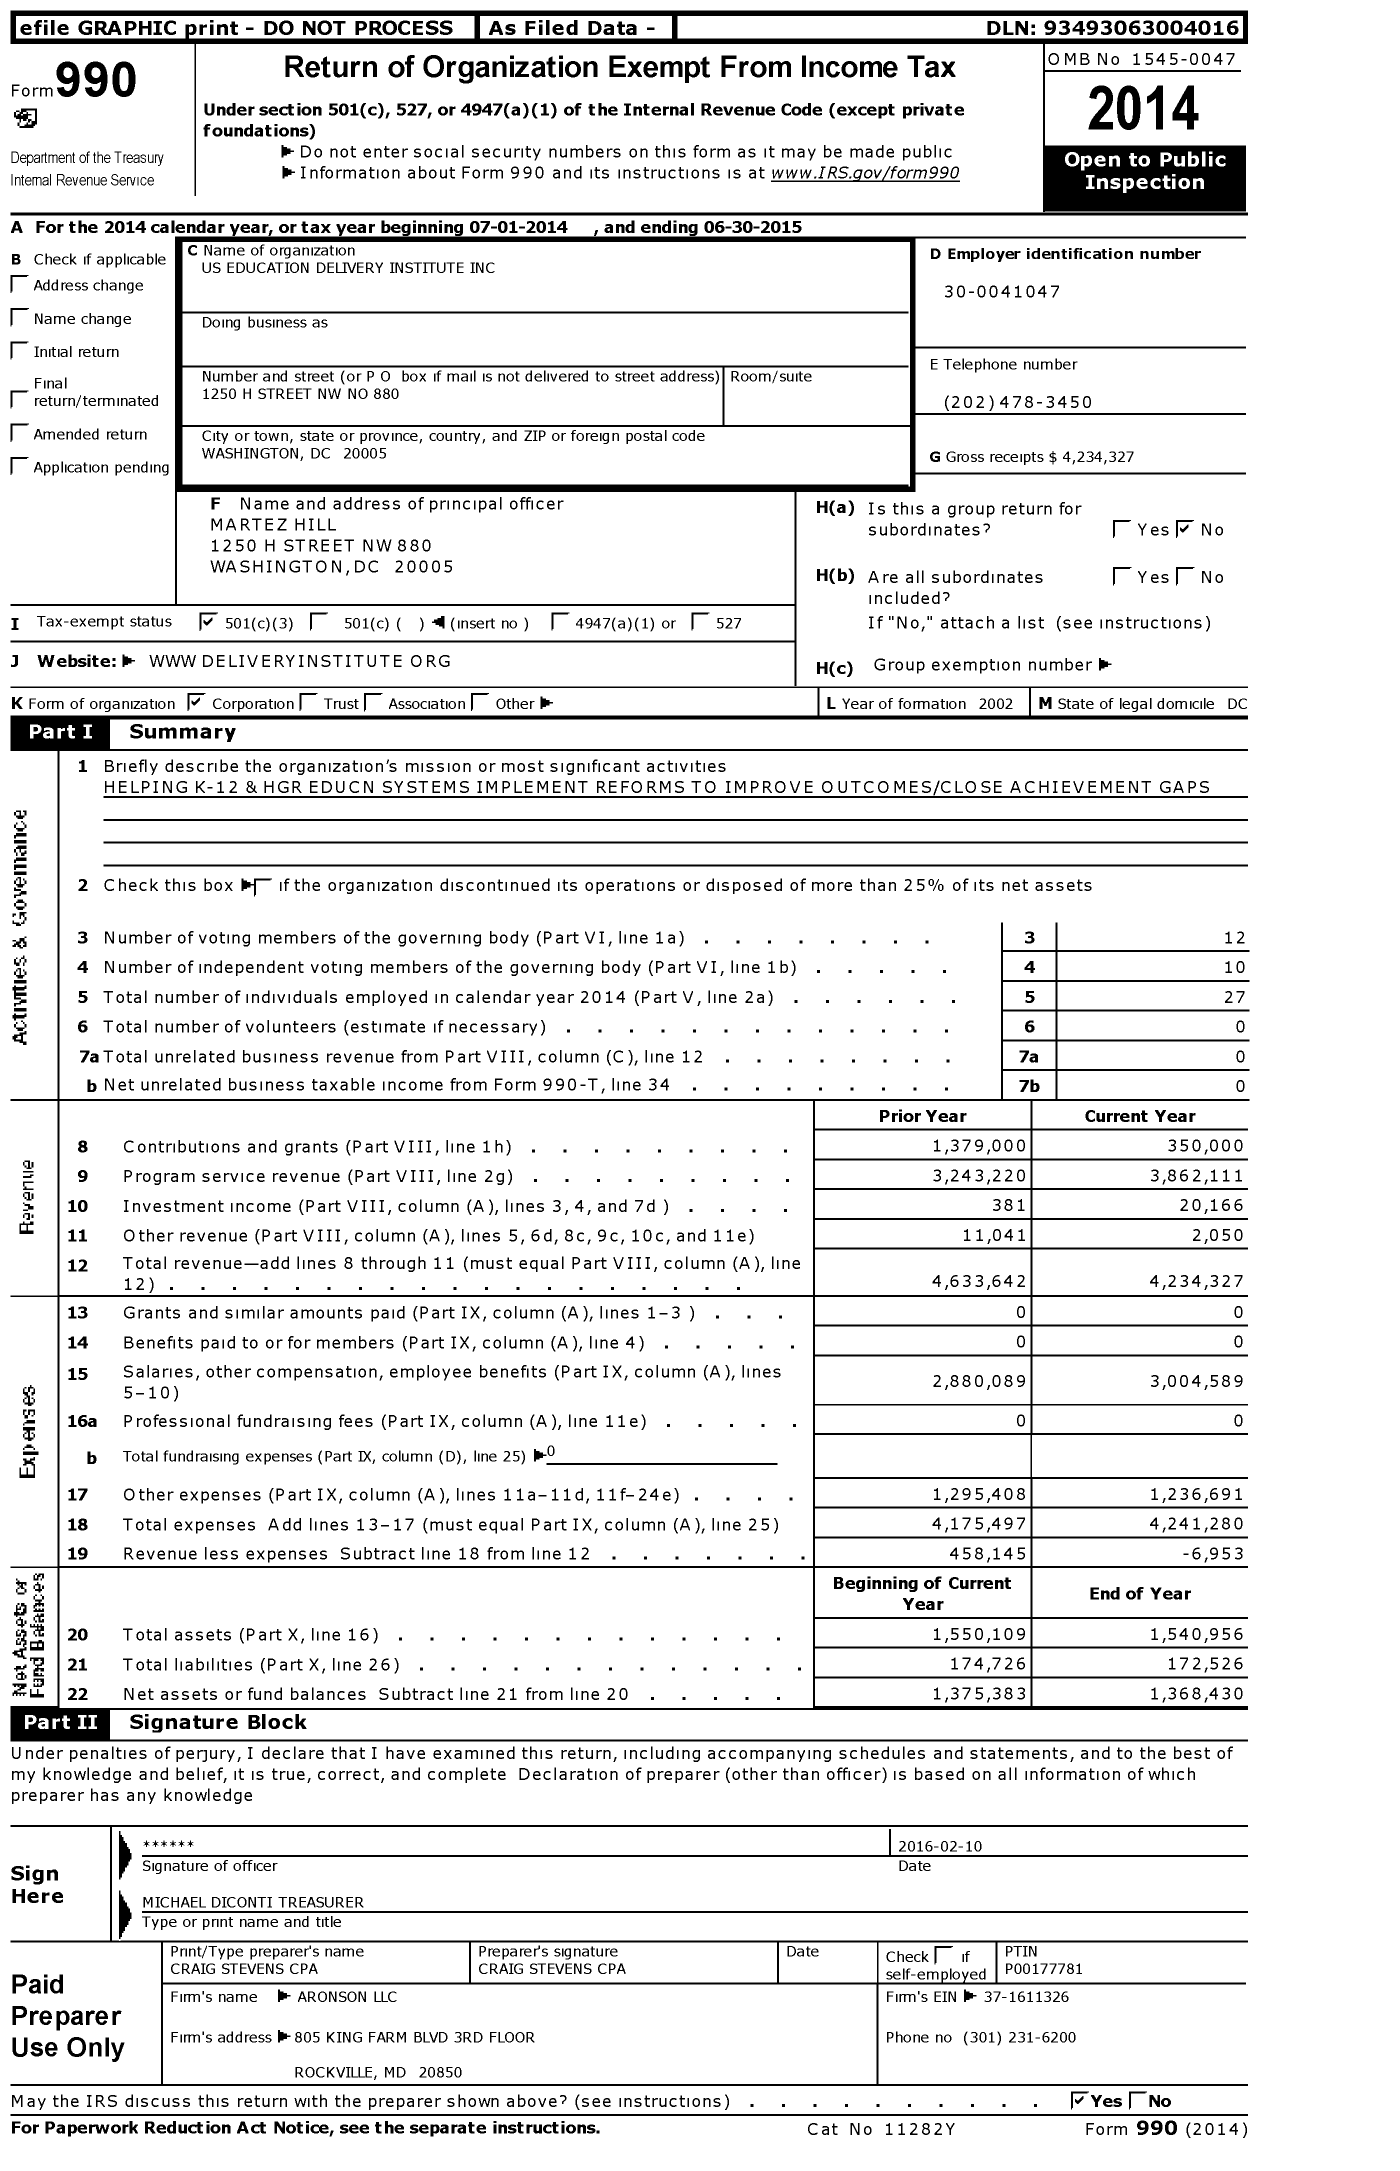 Image of first page of 2014 Form 990 for Education Delivery Institute (EDI)